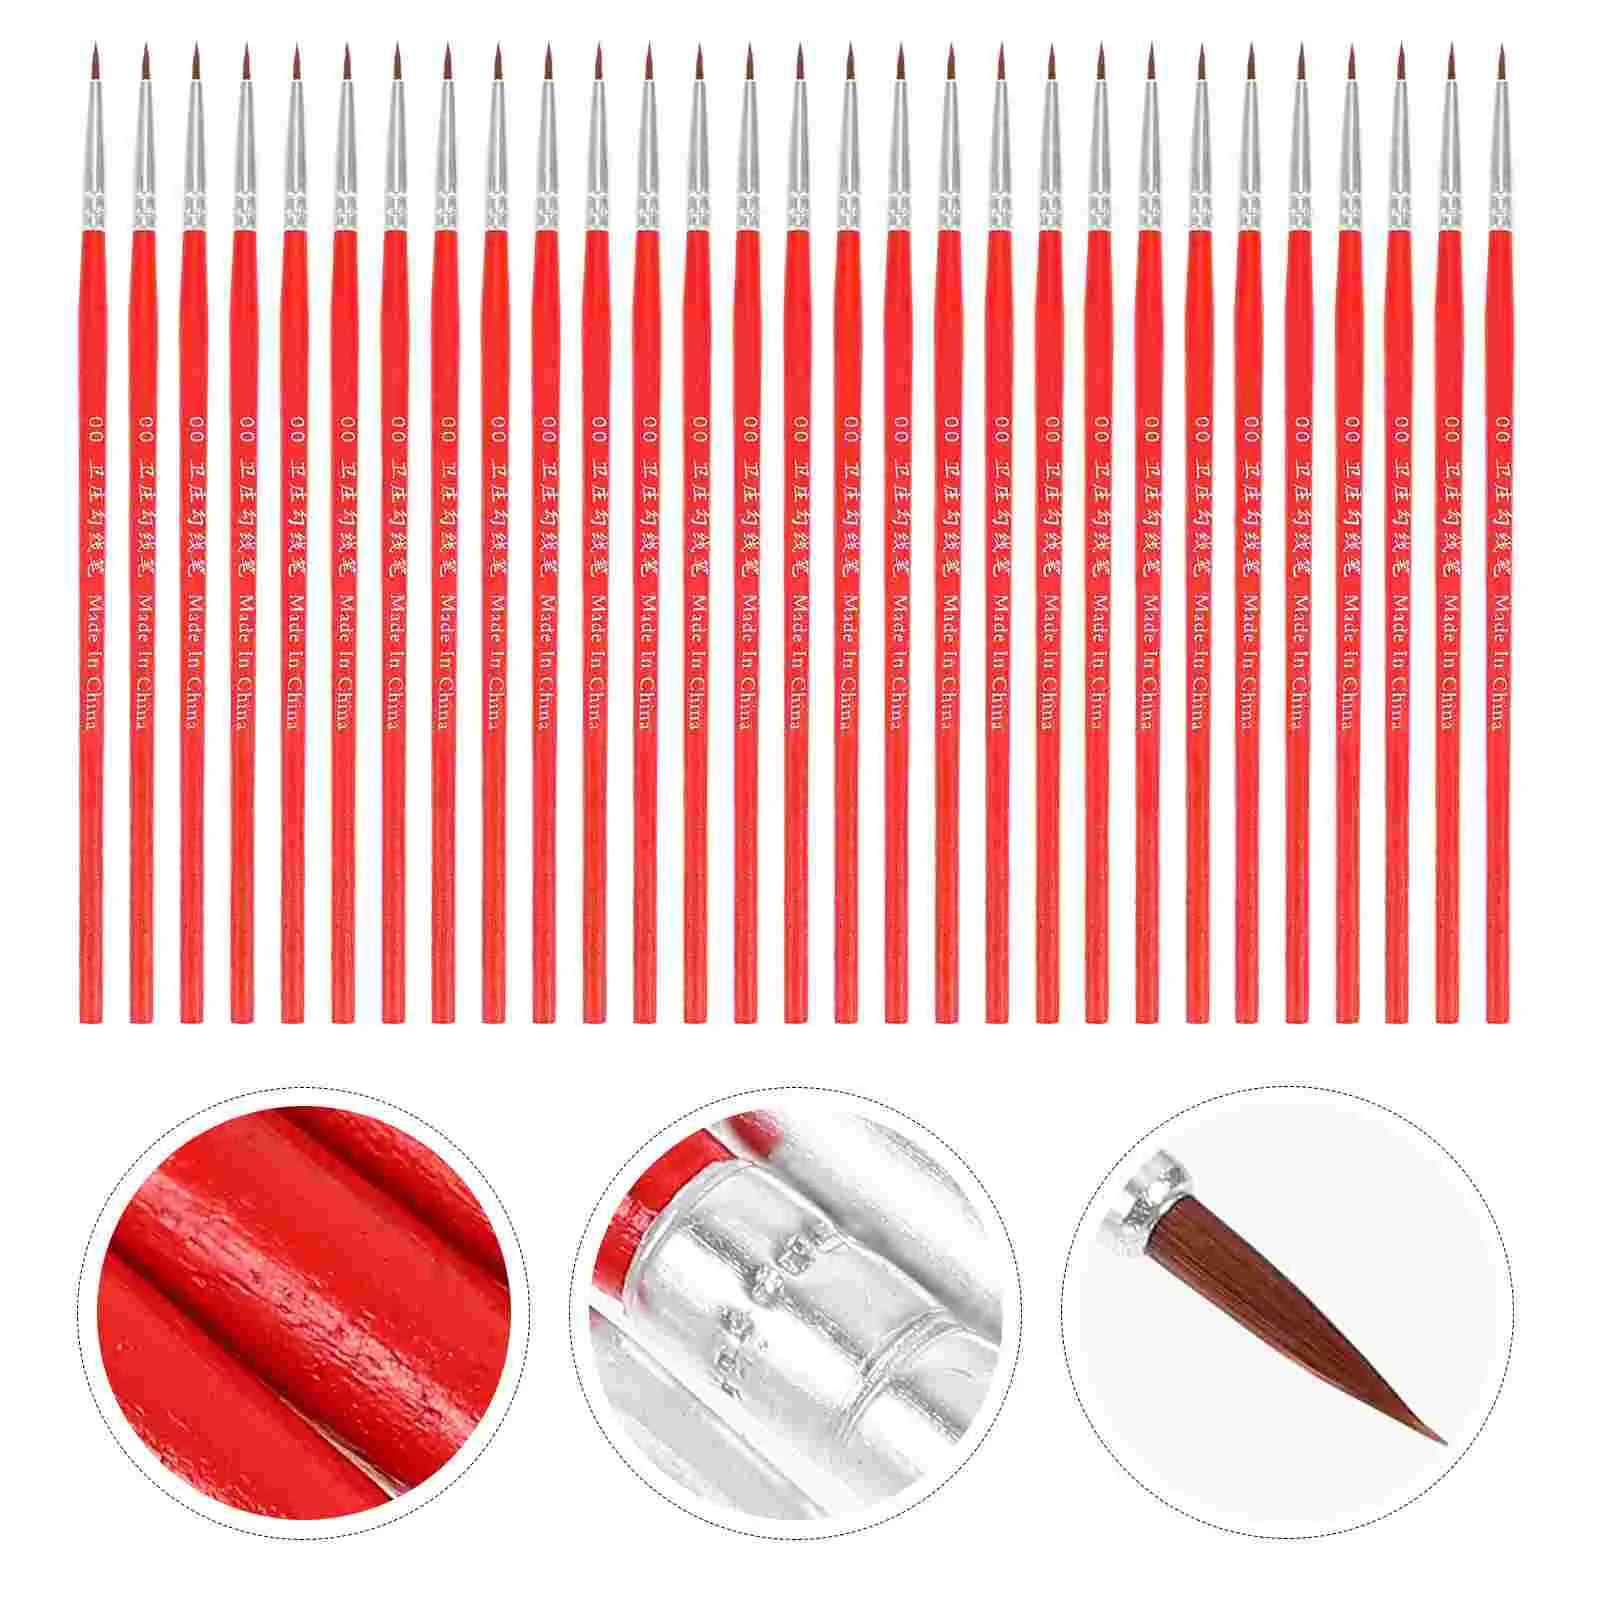 

100Pcs Detail Brush Miniature Painting Brushes Nylon Hair Brushes Brush for Watercolor Oil Nail Scale Model Painting Drawing (